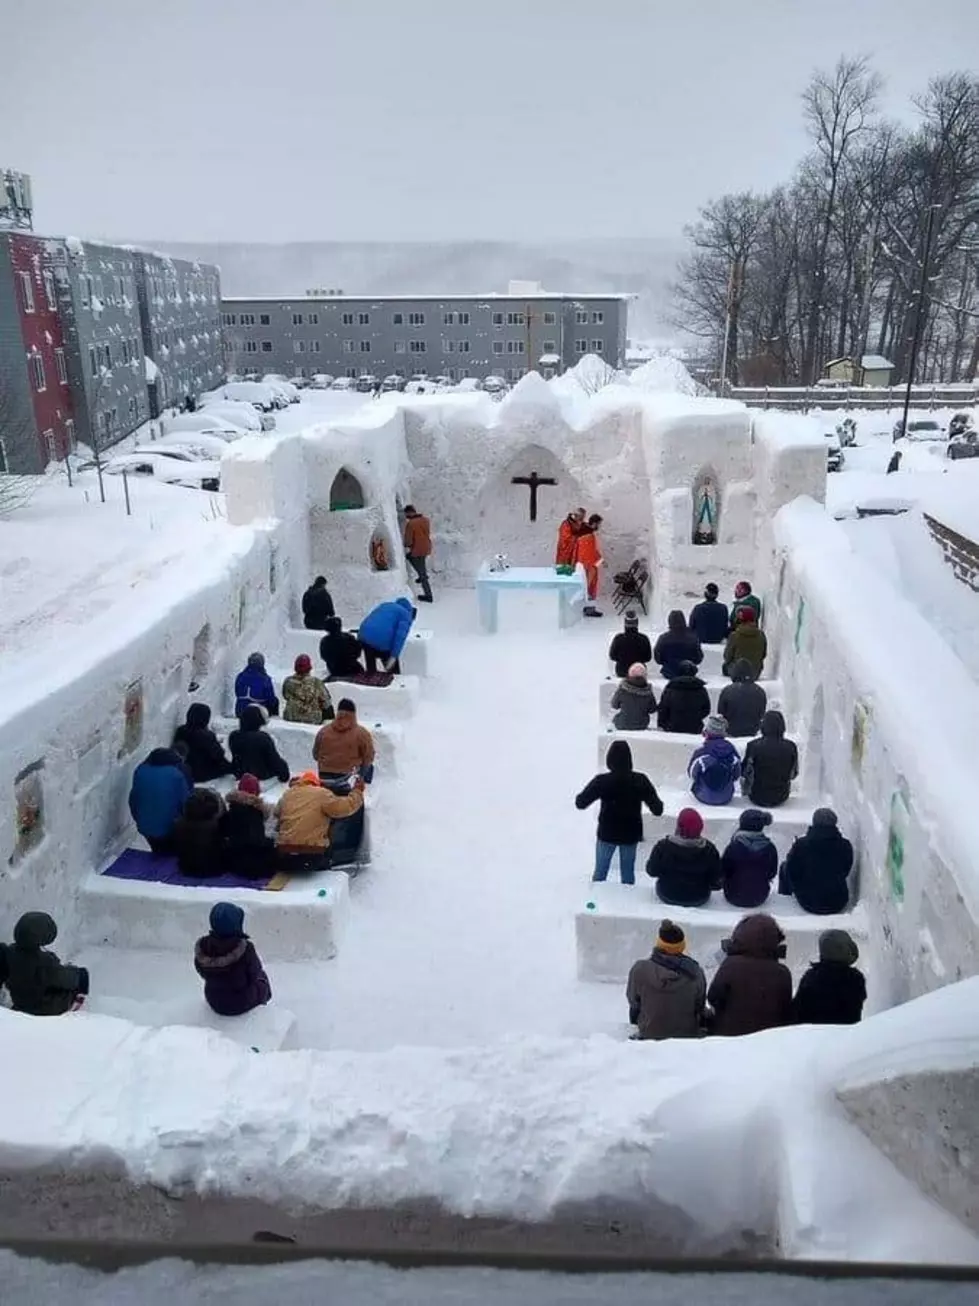 Watch: Students at Michigan Tech Build Chapel Made of Snow